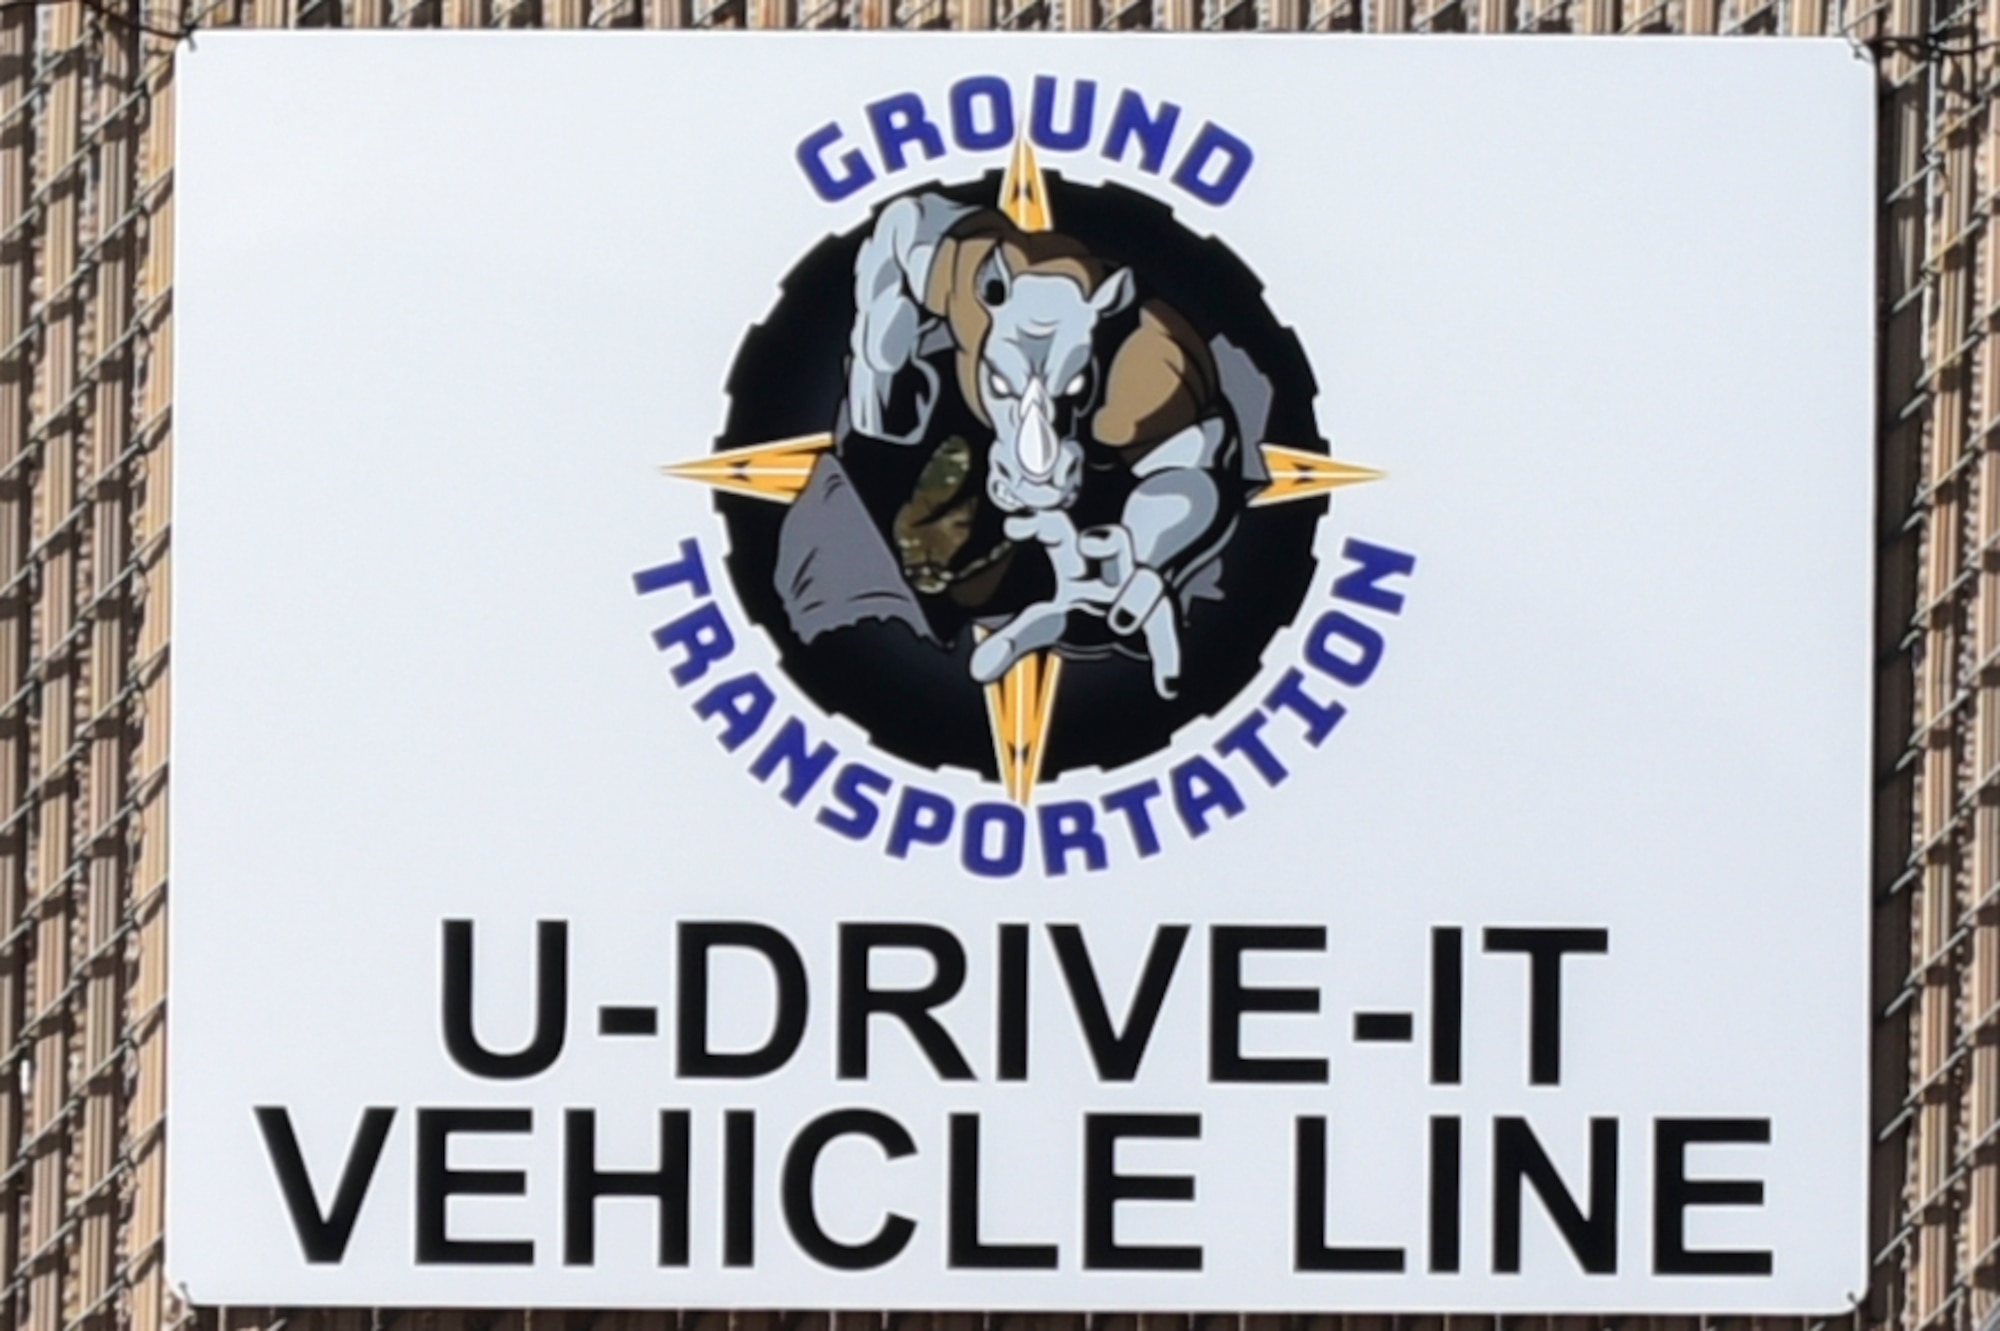 Picture of the ground transportation sign